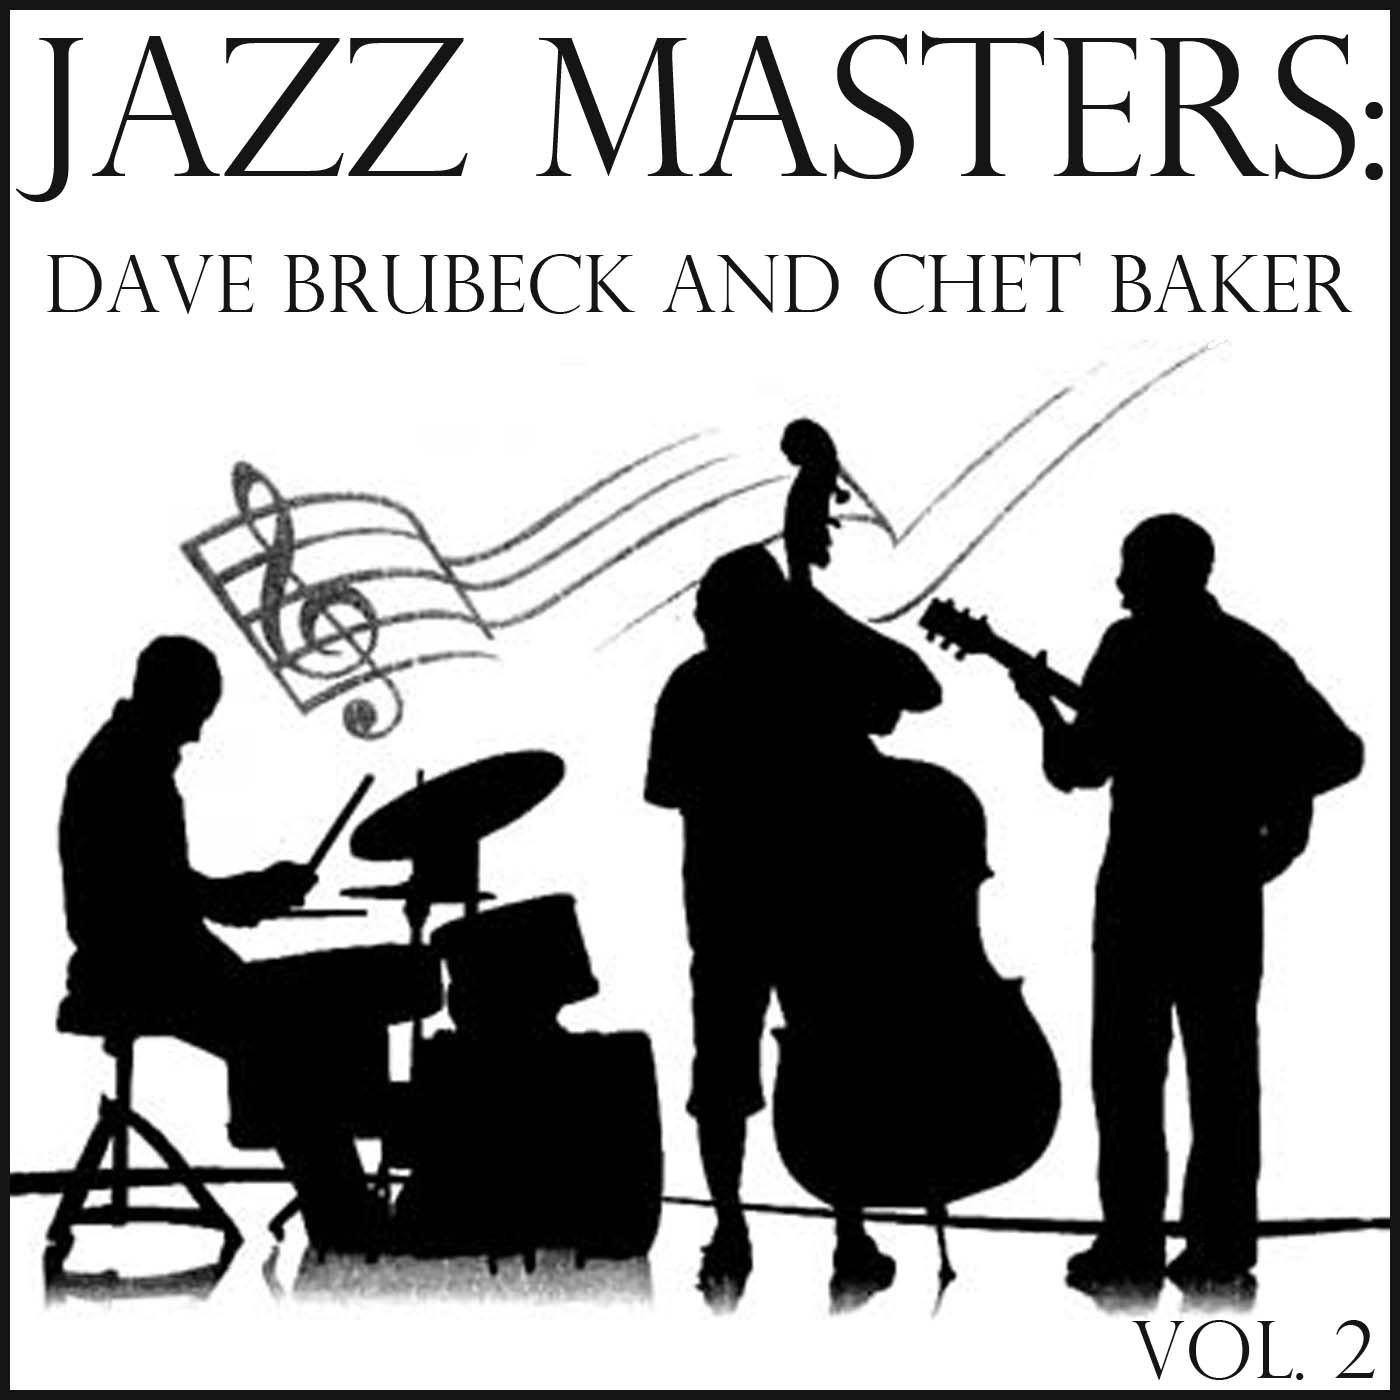 Jazz Masters: Dave Brubeck and Chet Baker, Vol. 2